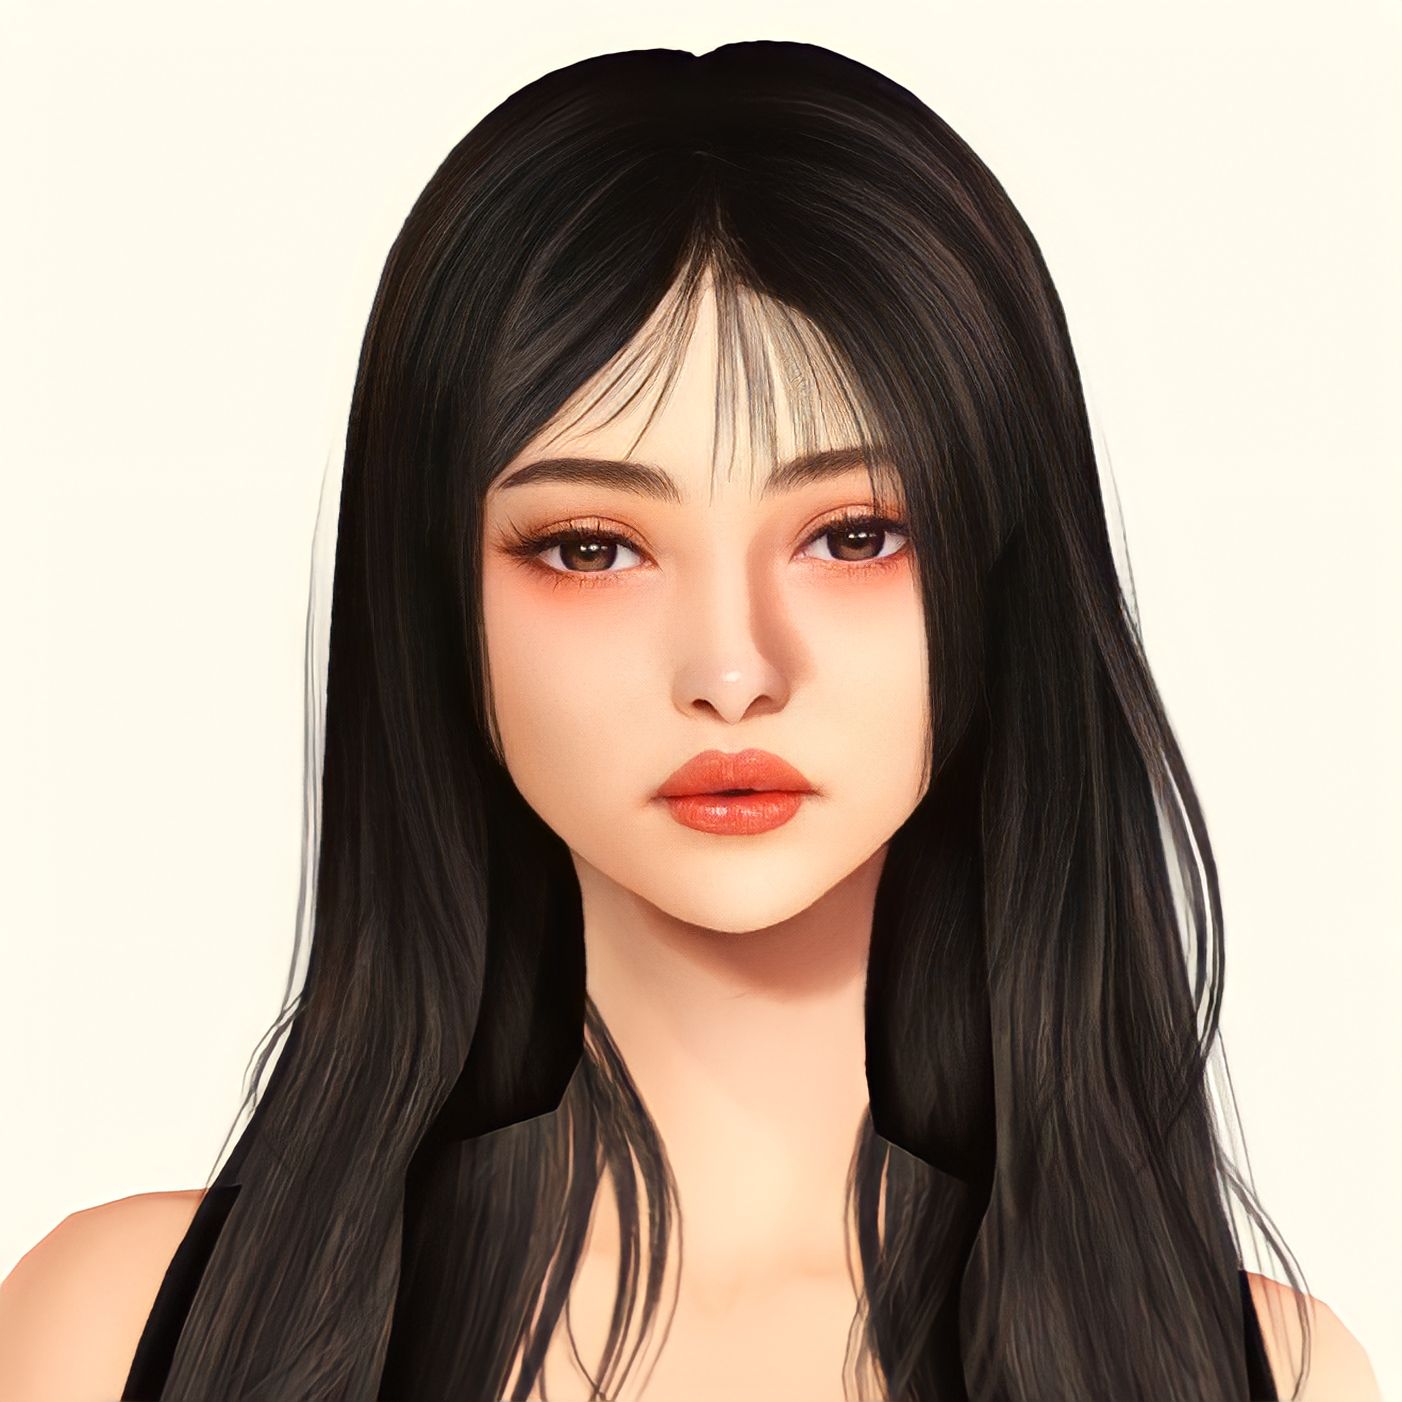 Audrina Kwon - The Sims 4 Sims / Households - CurseForge